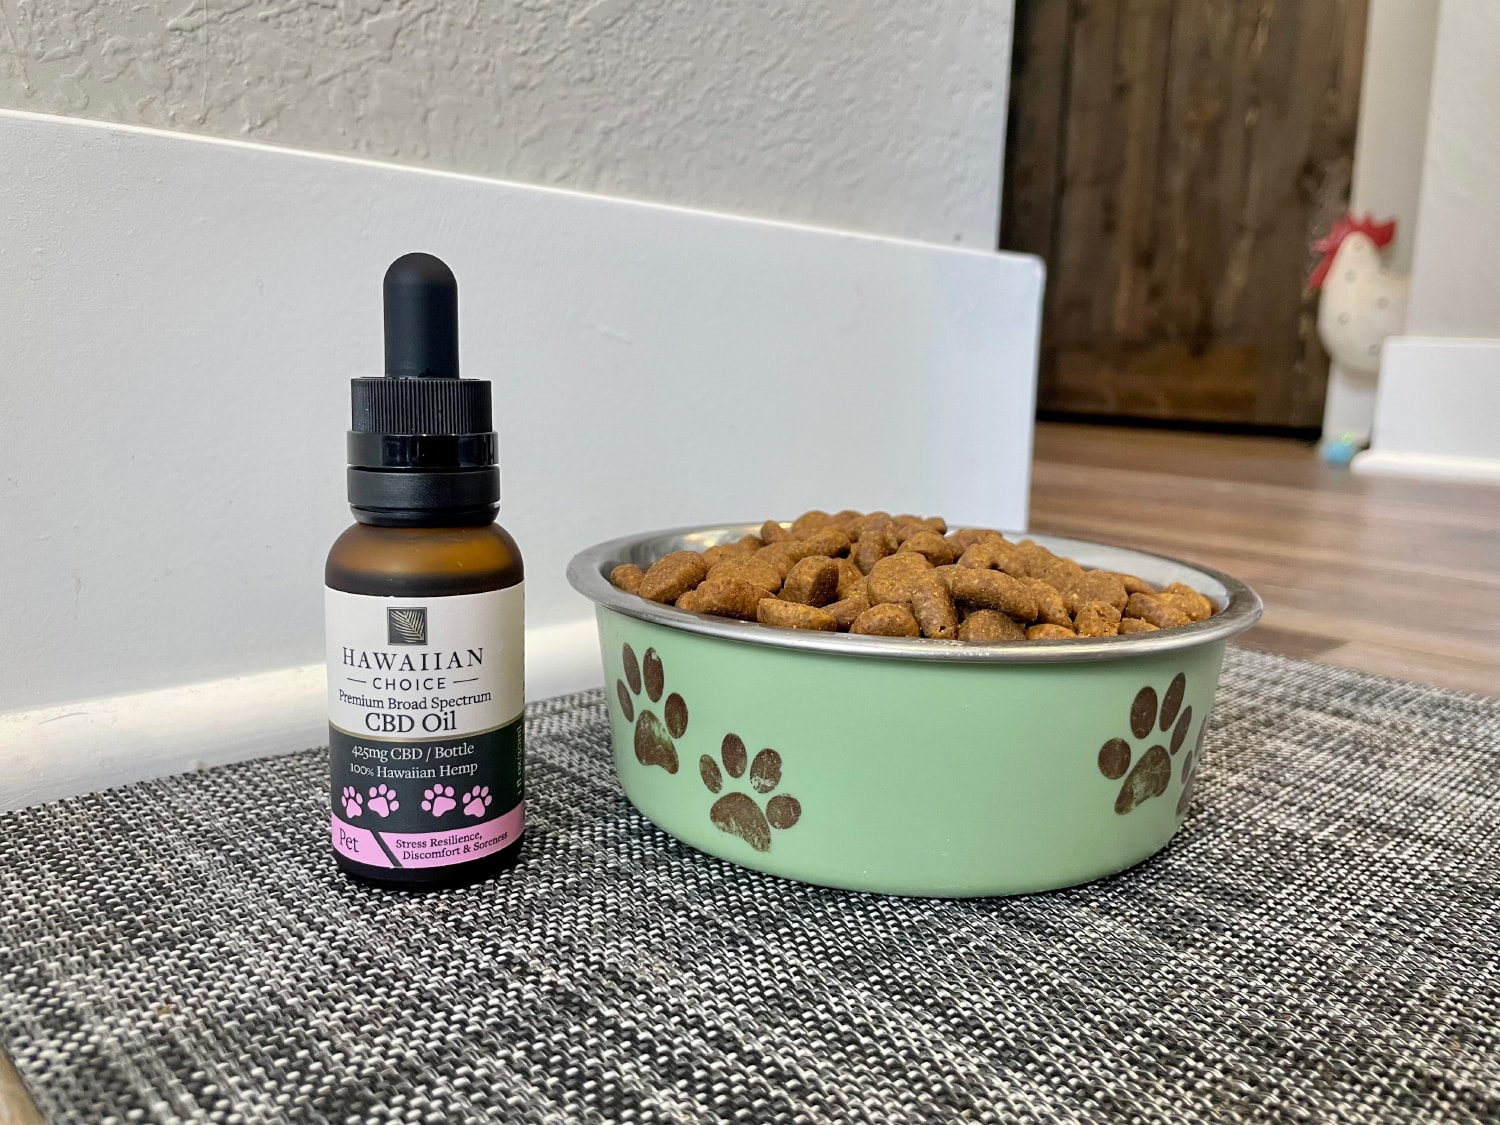 Rare Cannabinoid Dog CBD Oil - product bottle next to a bowl of dog food